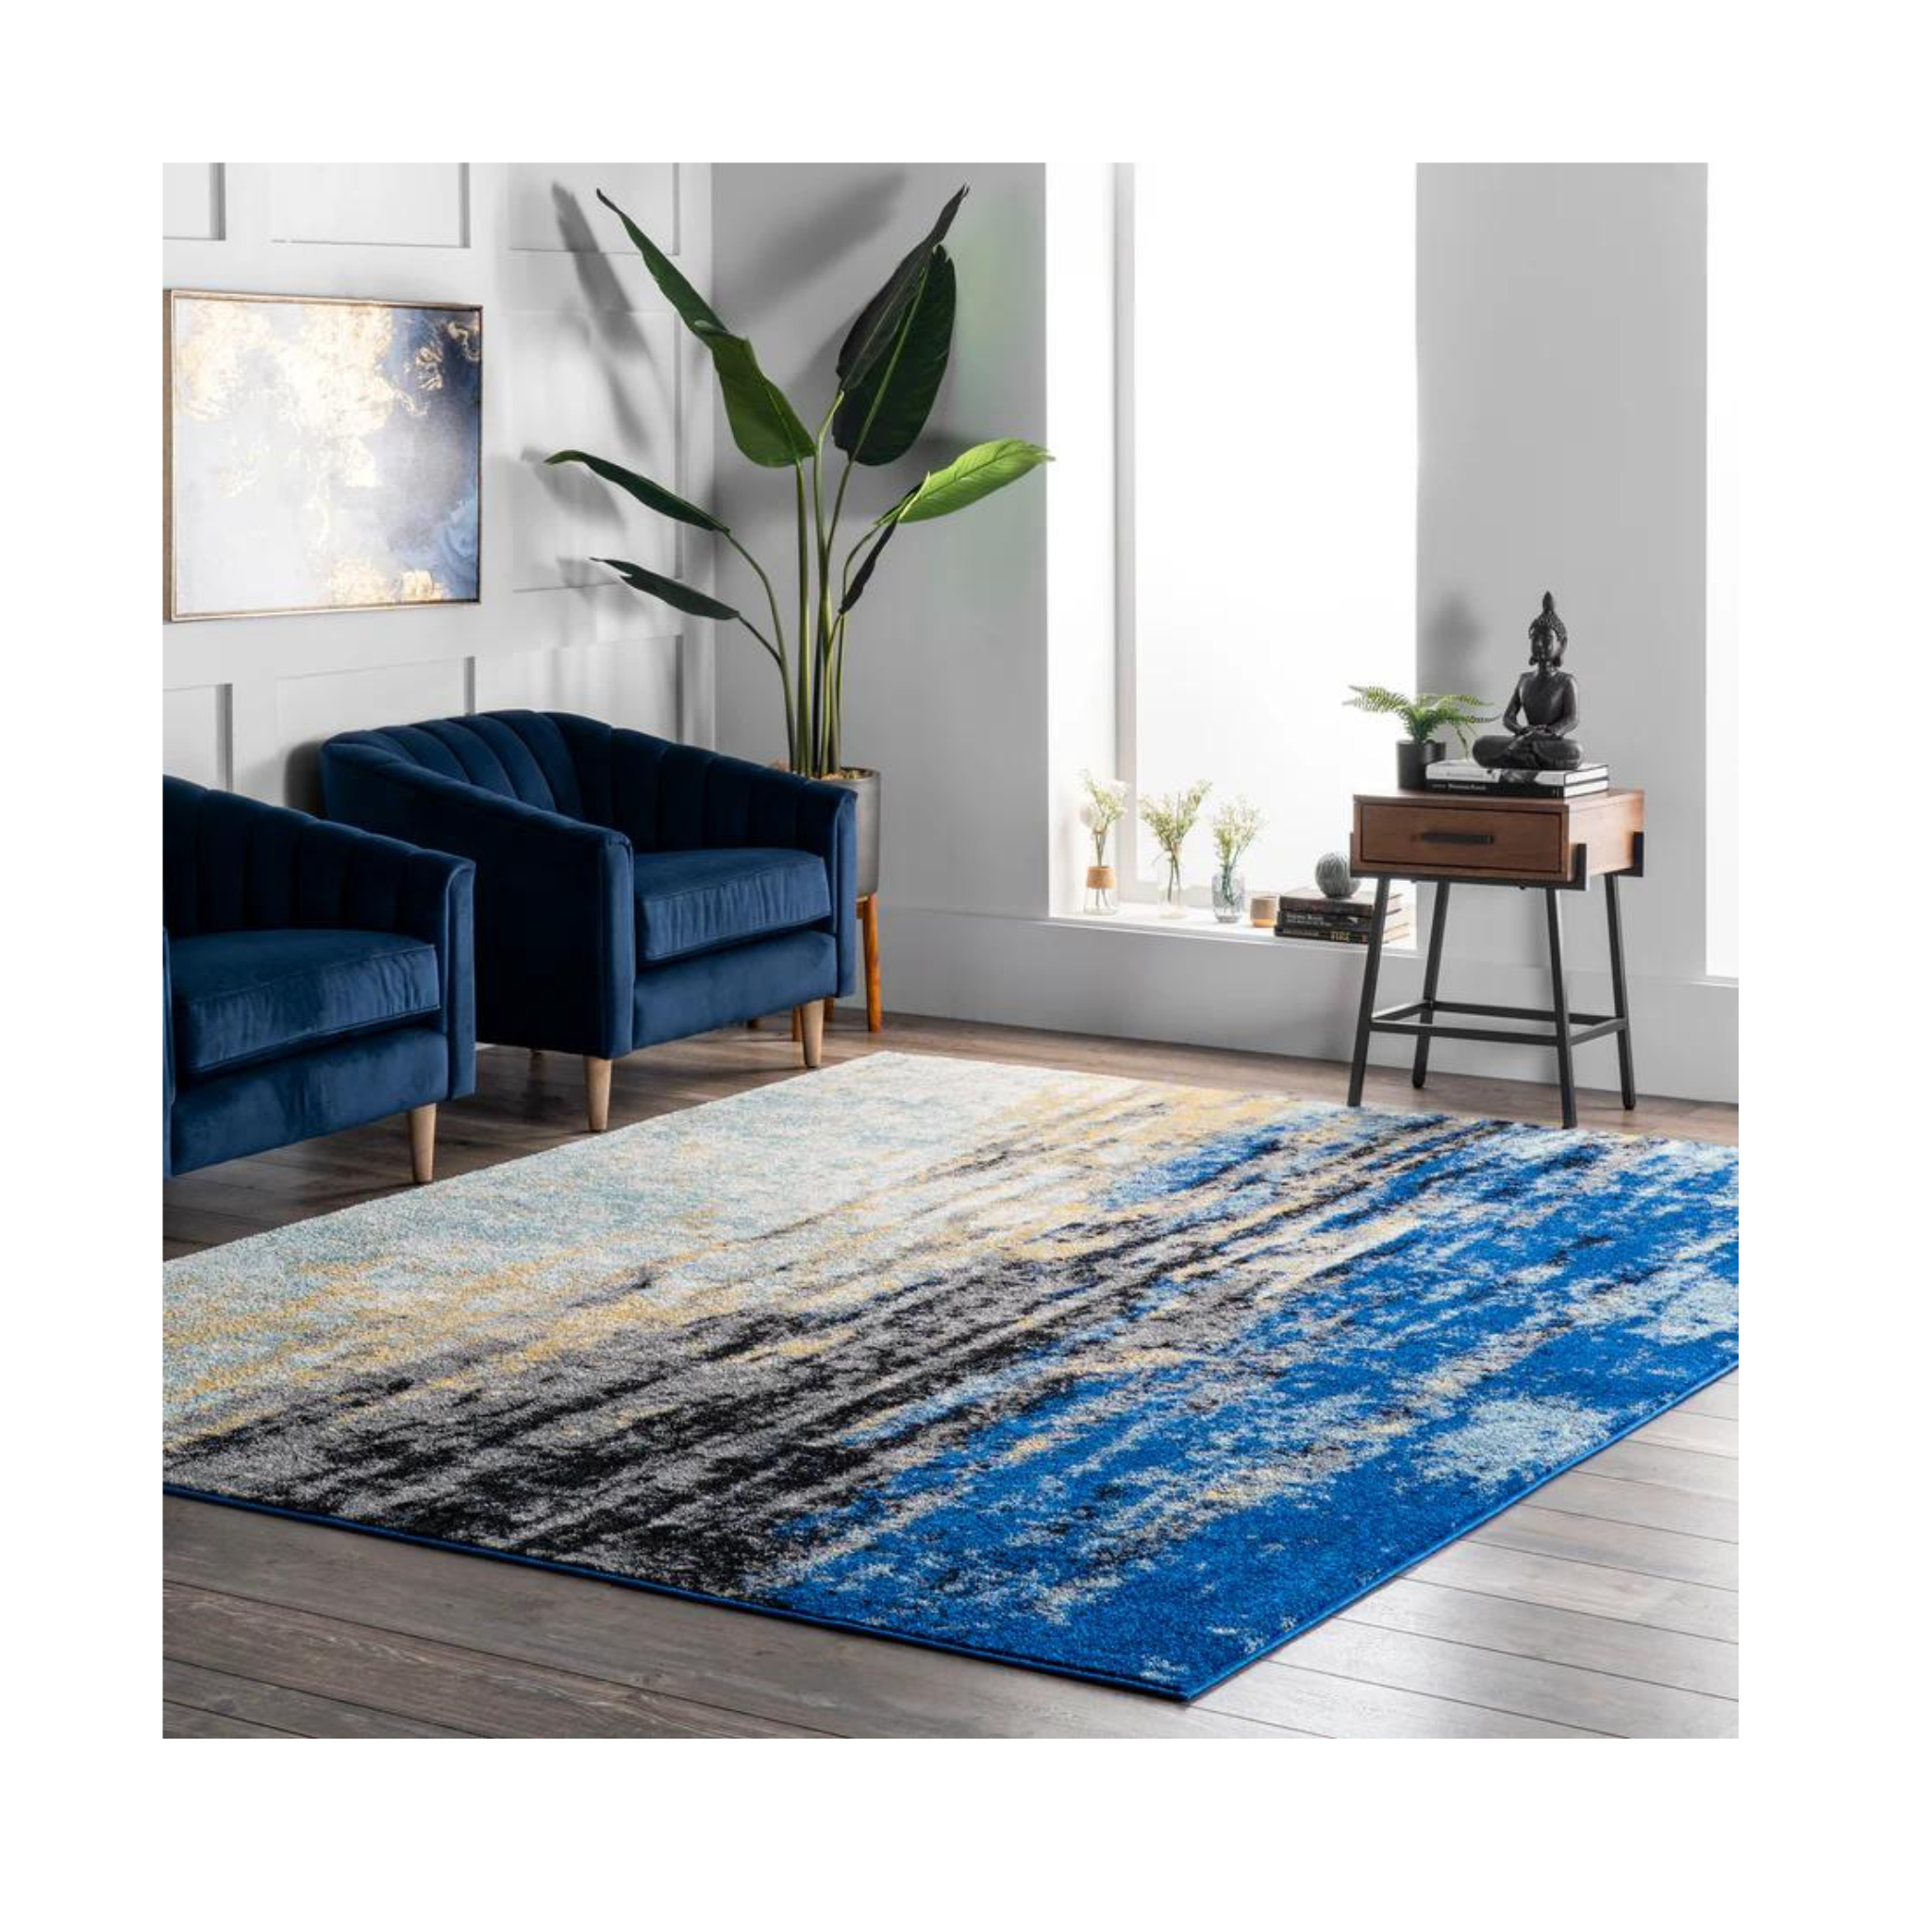 Save Up To 90% on NULOOM Area Rugs!